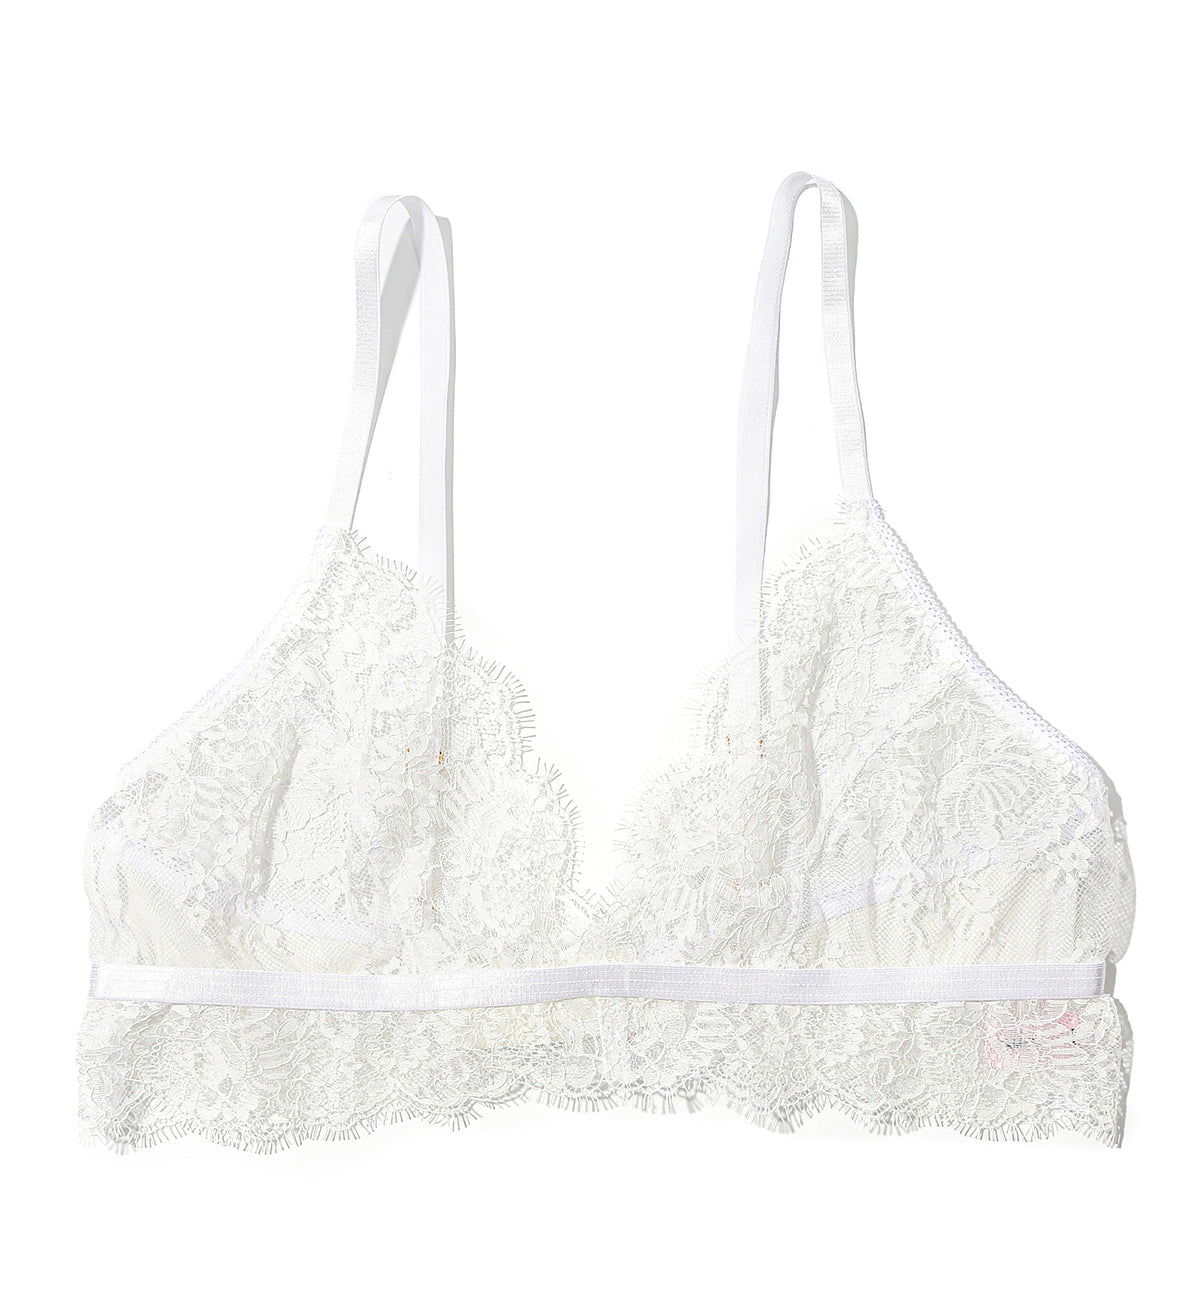 Hanky Panky Bridal Happily Ever After Triangle Bralette (4R7881),XS,Light Ivory - Light Ivory,XS